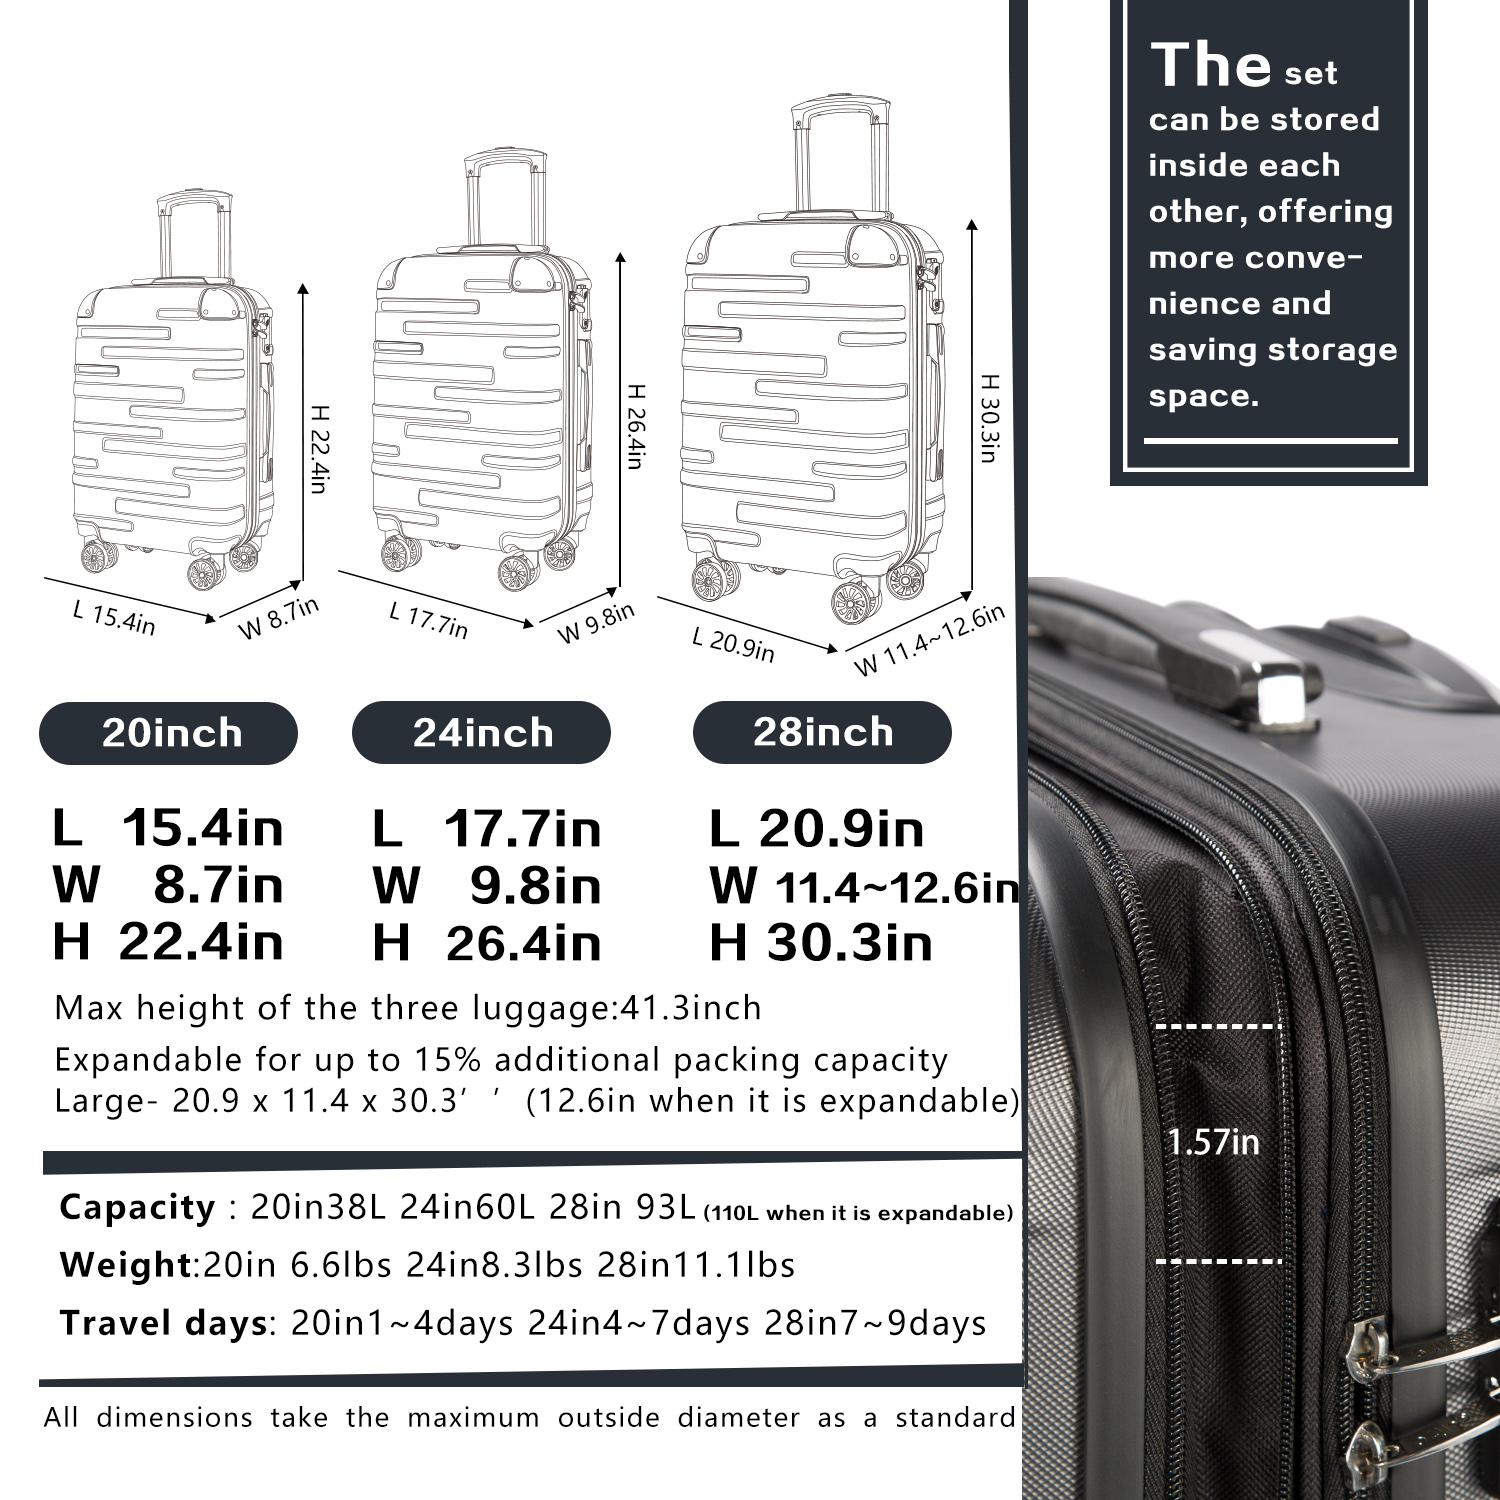 Coolife Luggage Expandable(only 28") Suitcase 3 Piece Set with TSA Lock Spinner 20in24in28in